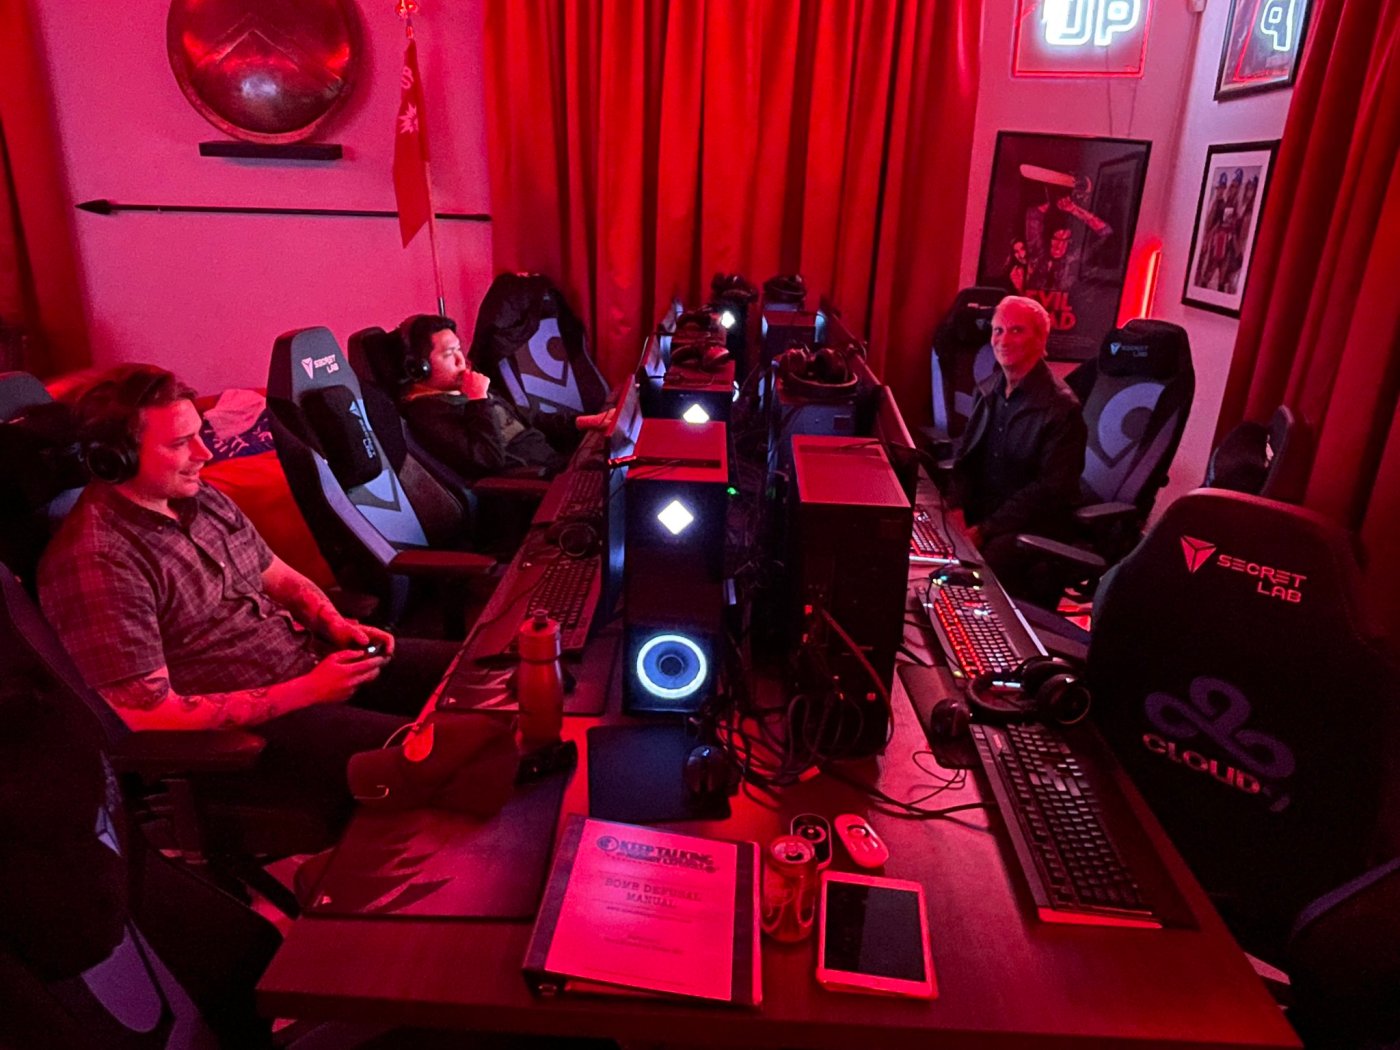 Stack Up’s Overwatch Program came about partly due to Stack Up’s mission of supporting Veterans “through the power of gaming.”